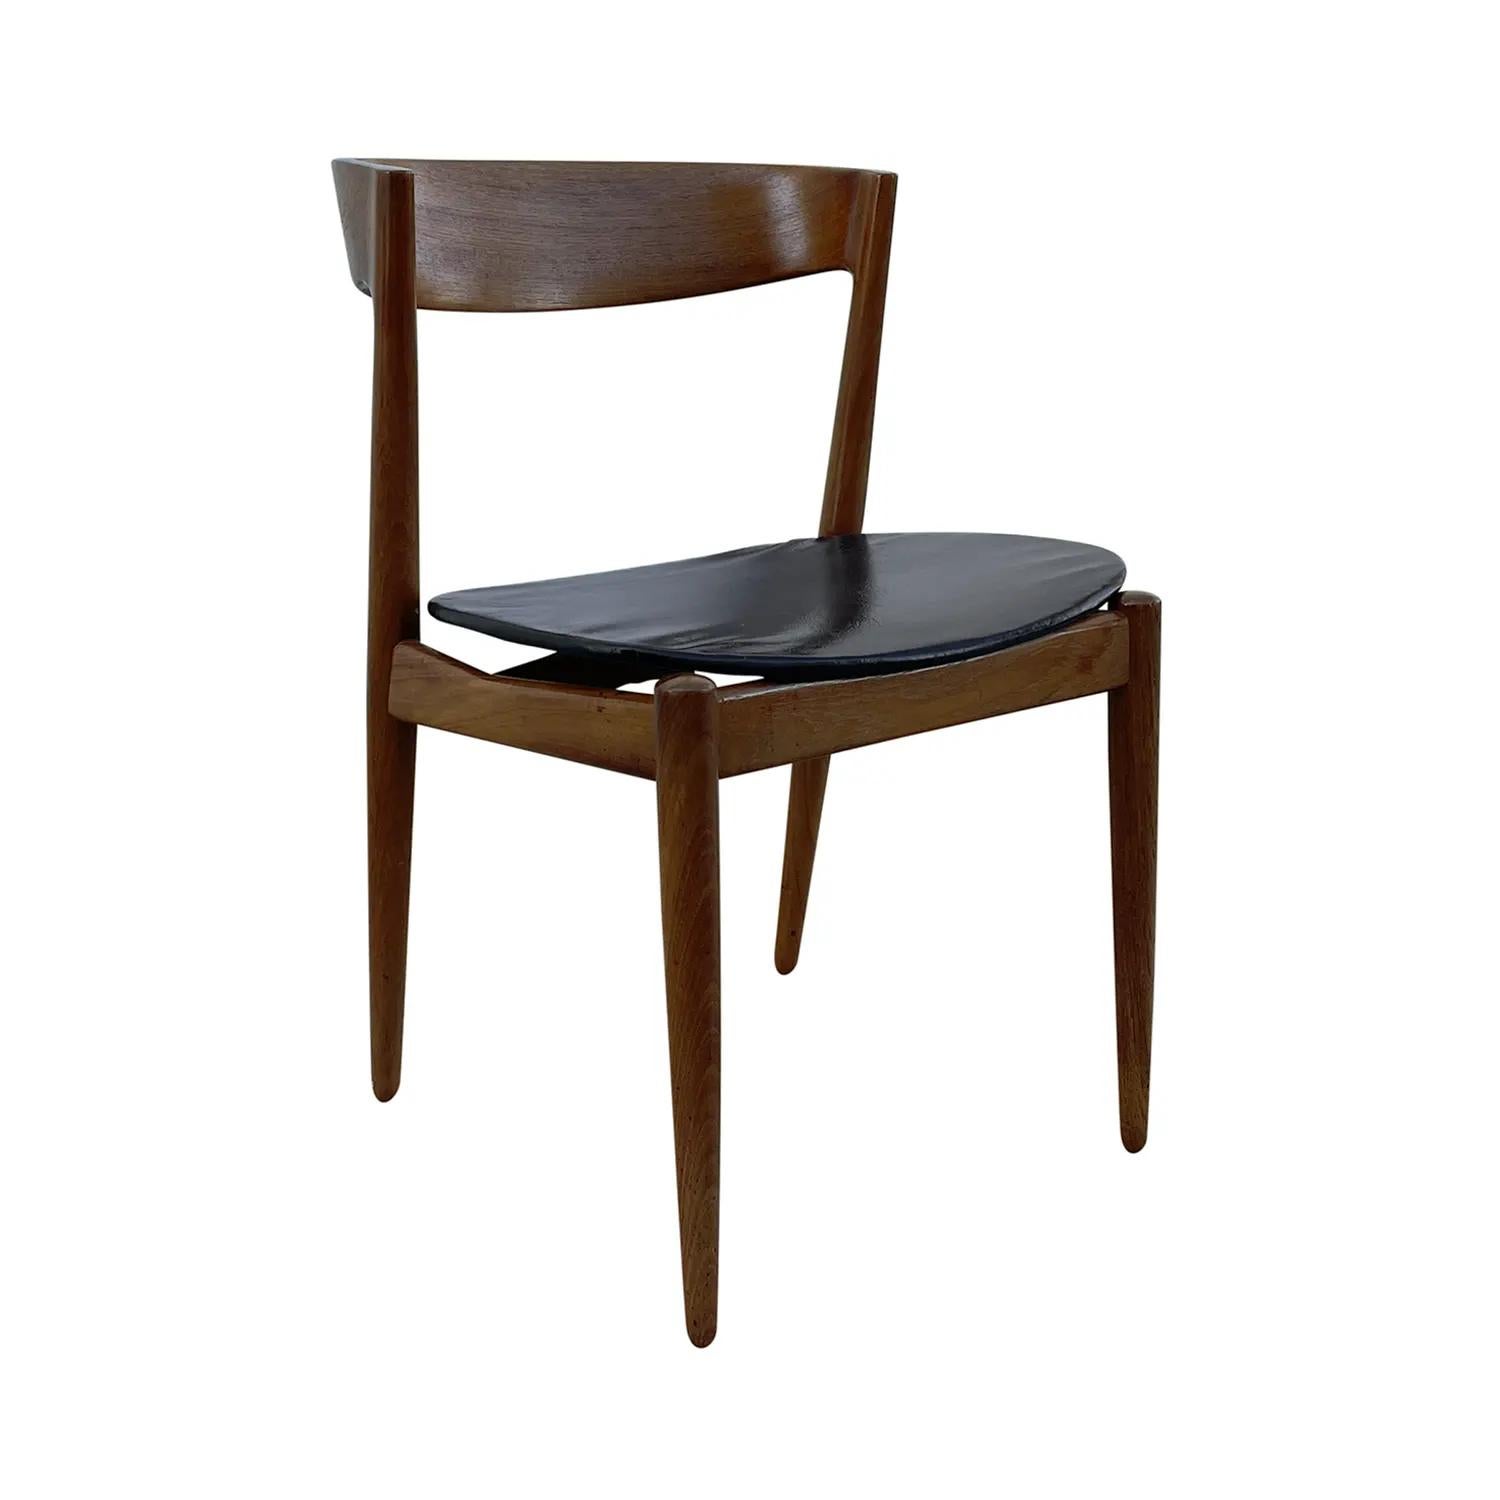 20th Century Danish Vintage Teak Side Chair - Scandinavian Faux Leather Chair In Good Condition For Sale In West Palm Beach, FL